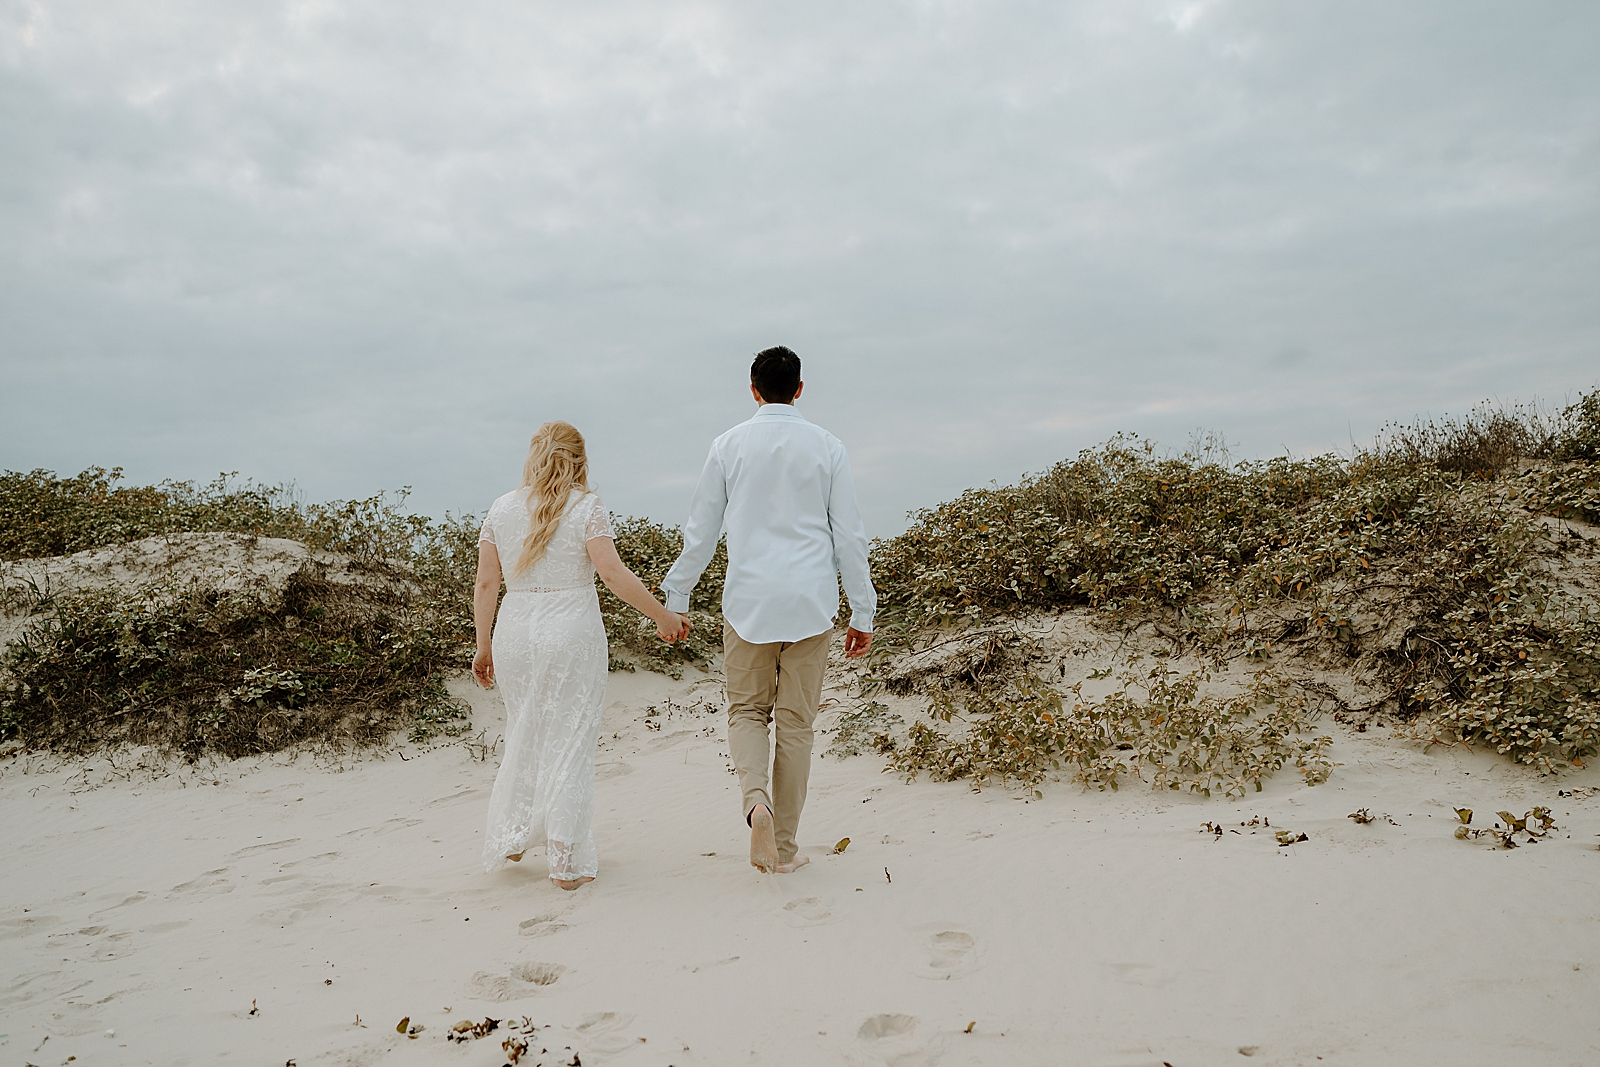 man in blue shirt holding hands with blonde woman in white dress on beach